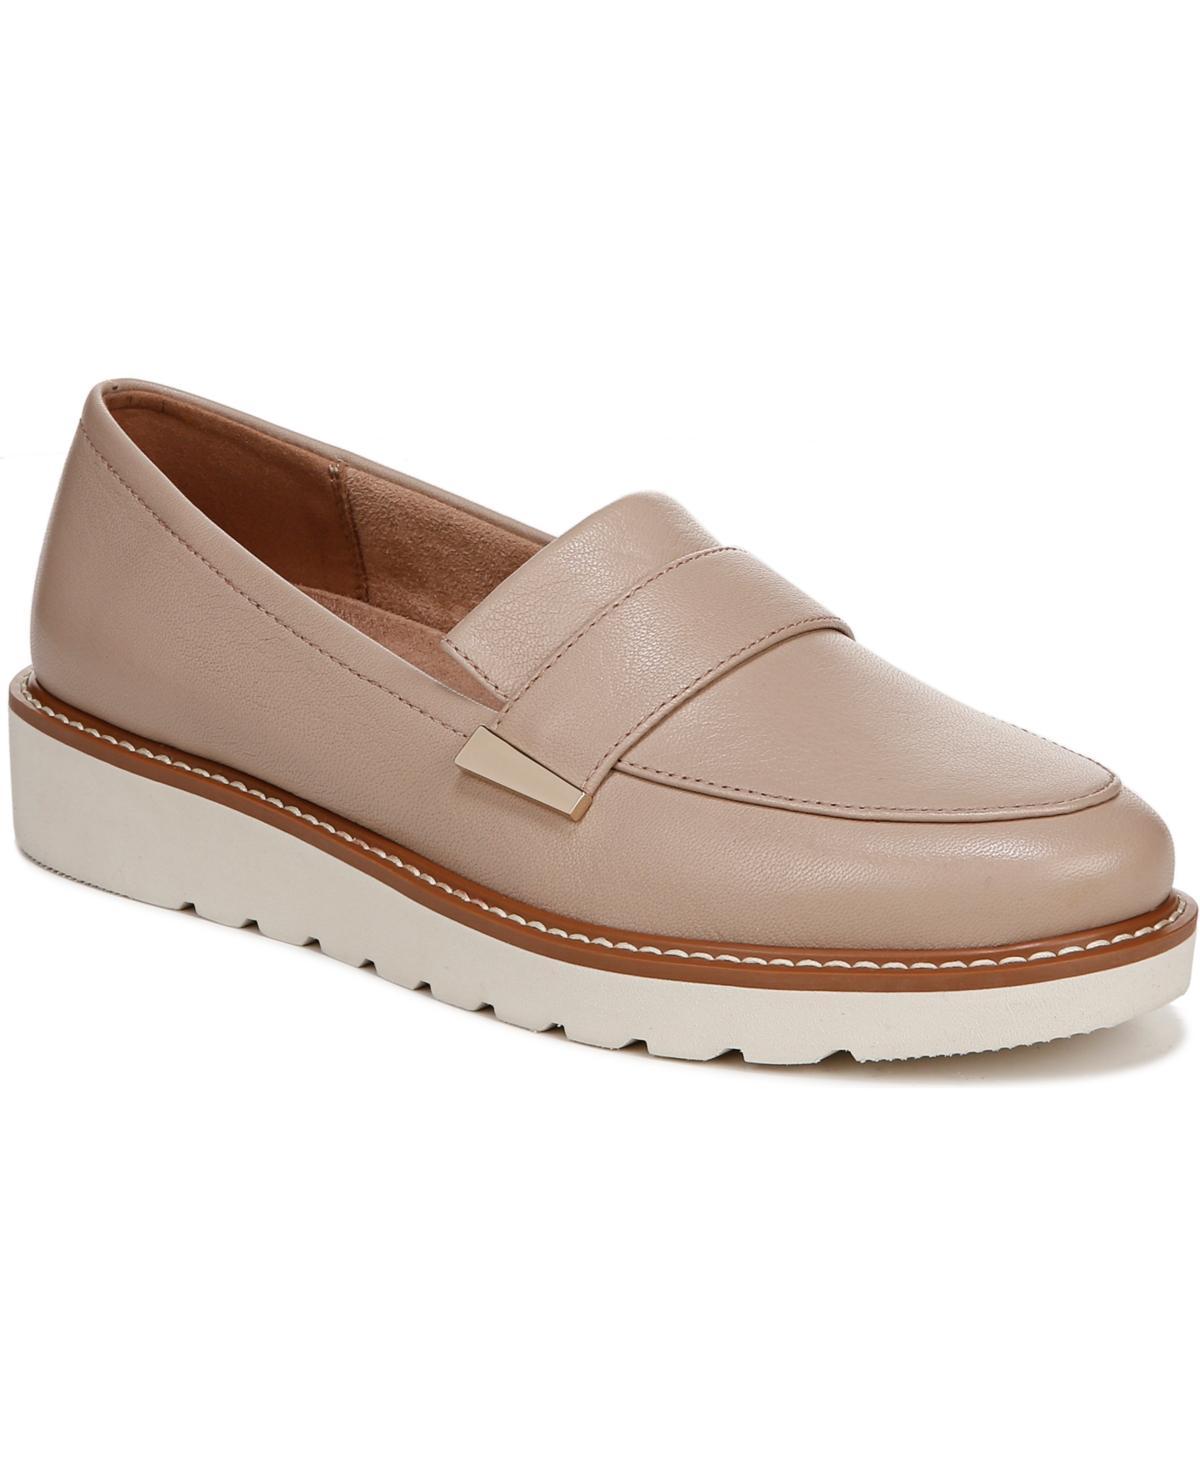 Naturalizer Adiline Patent Leather Slip-On Lightweight Wedge Loafers Product Image